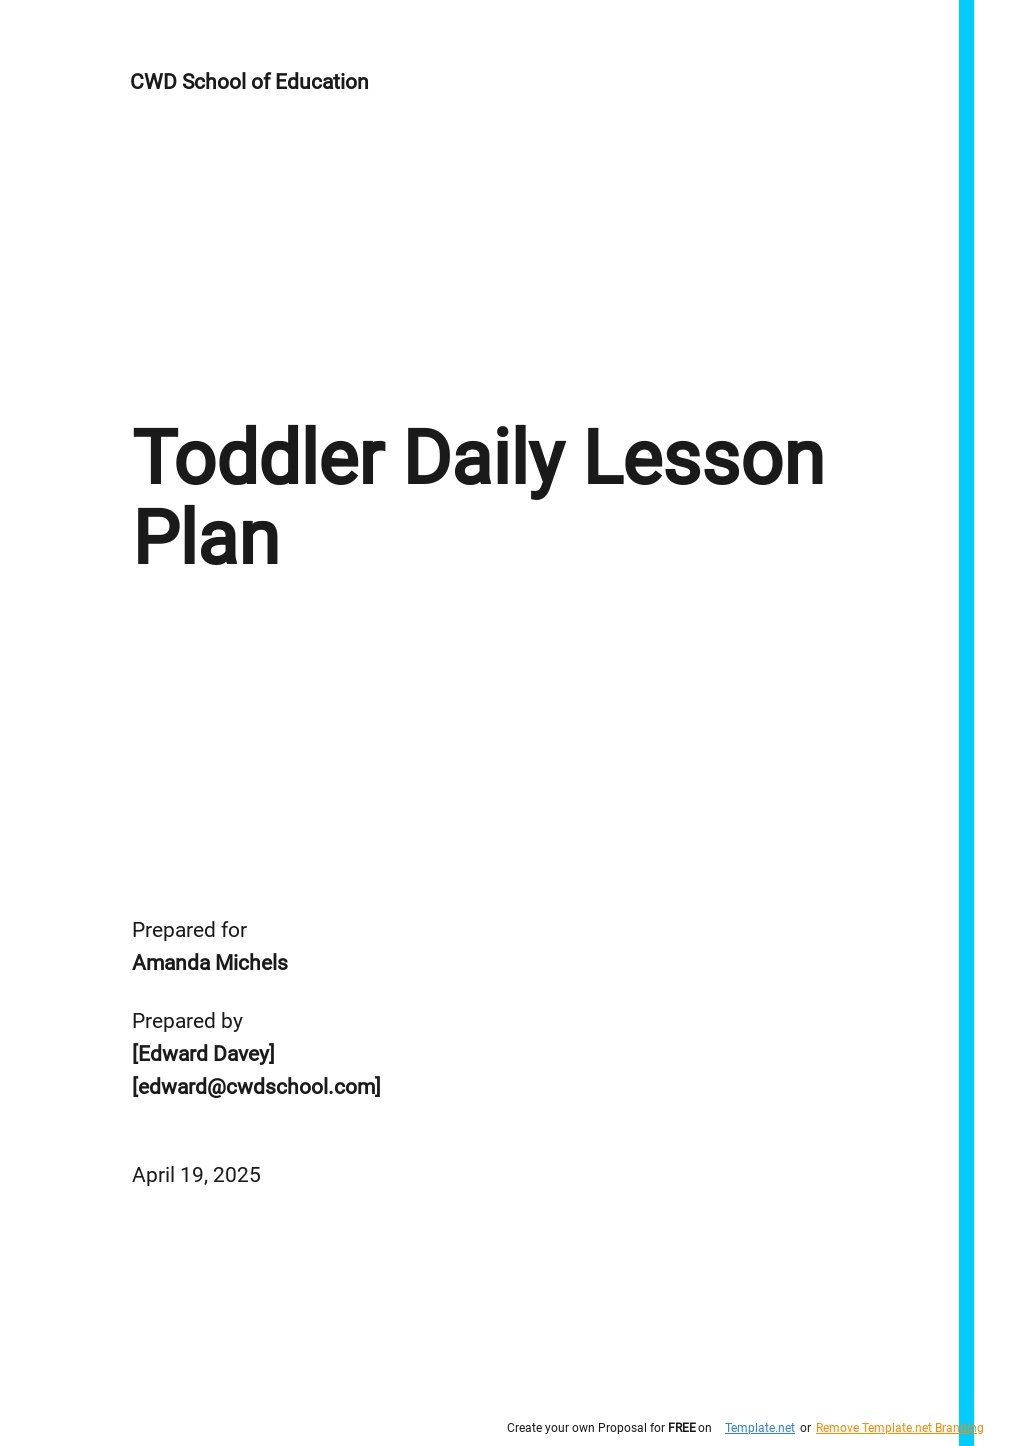 Toddler lesson Plan Template.jpe